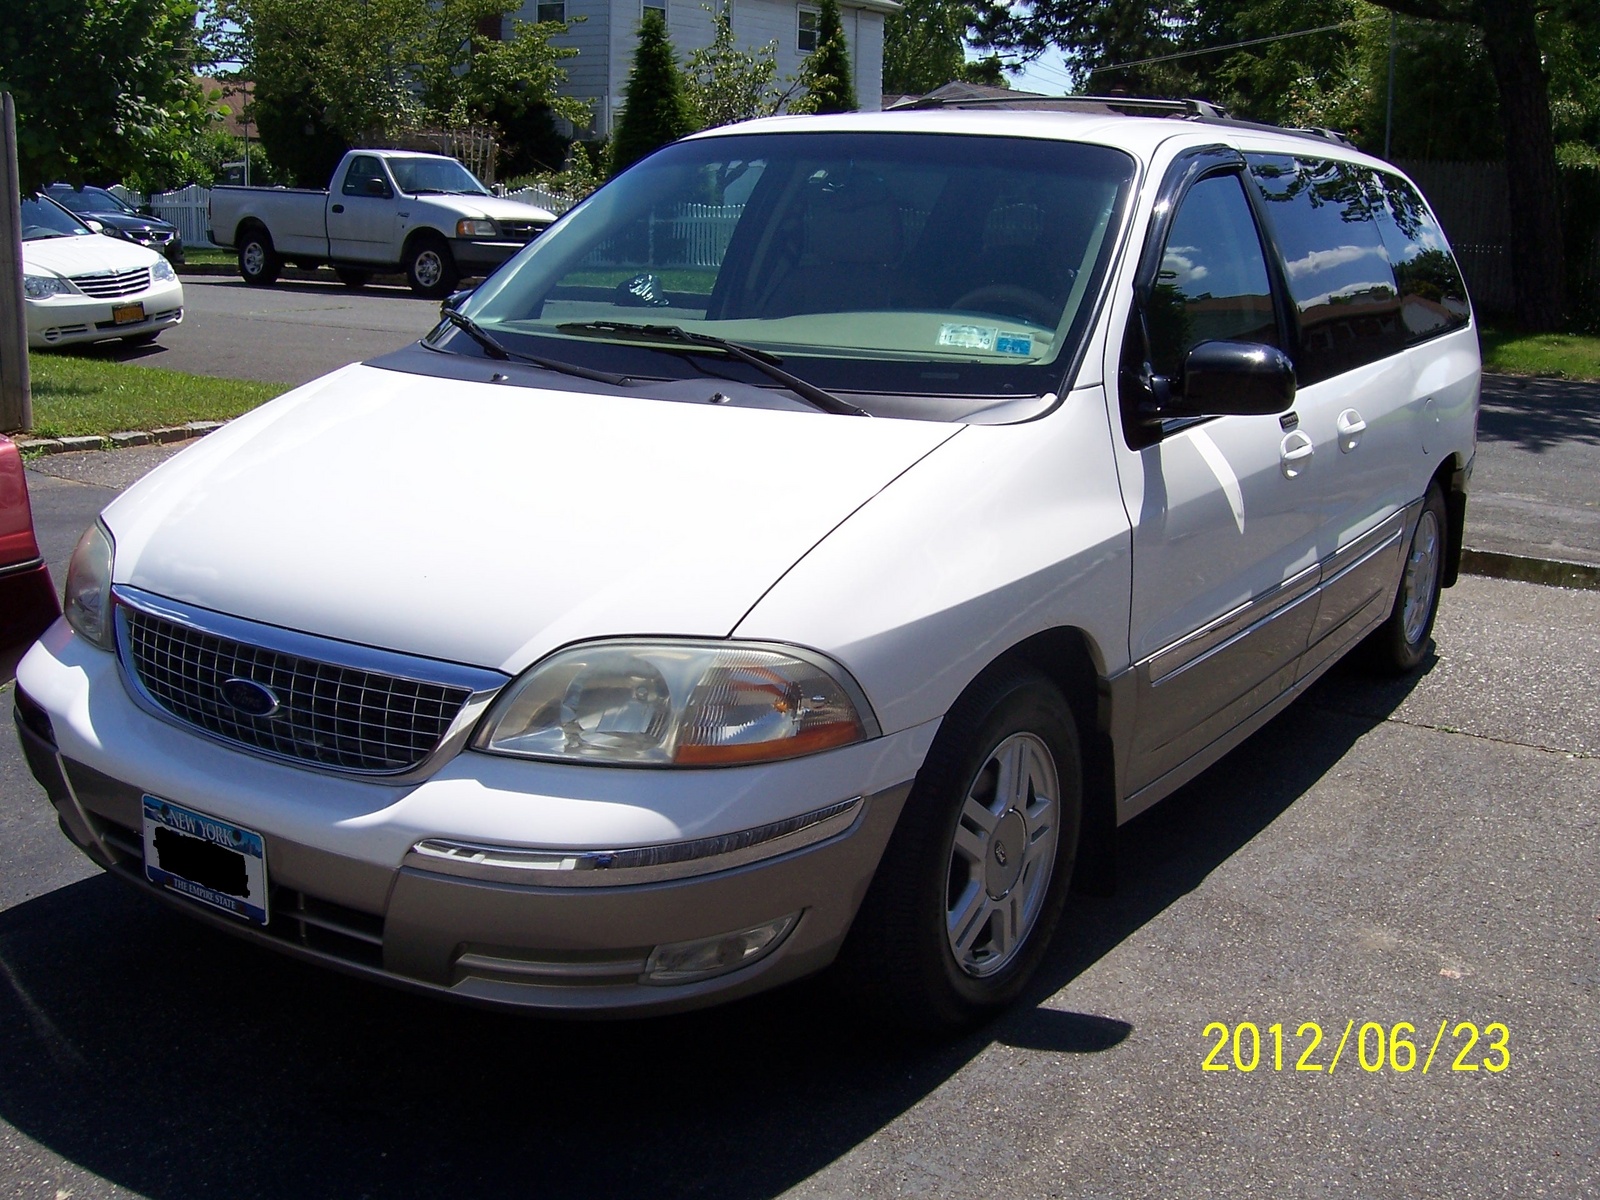 Accessory ford windstar #8